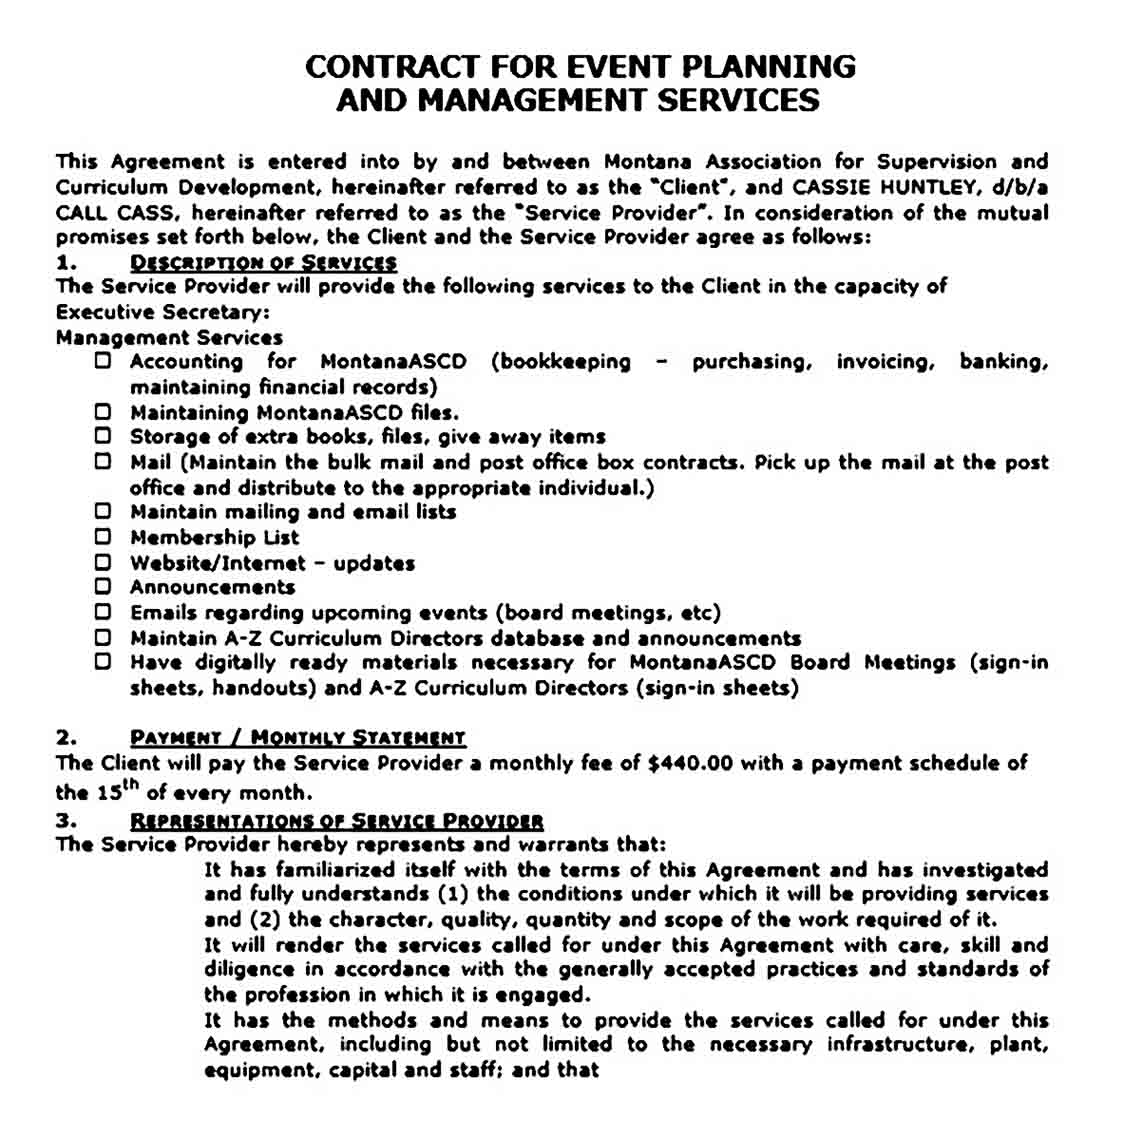 Contract for Event Planning and Management Services